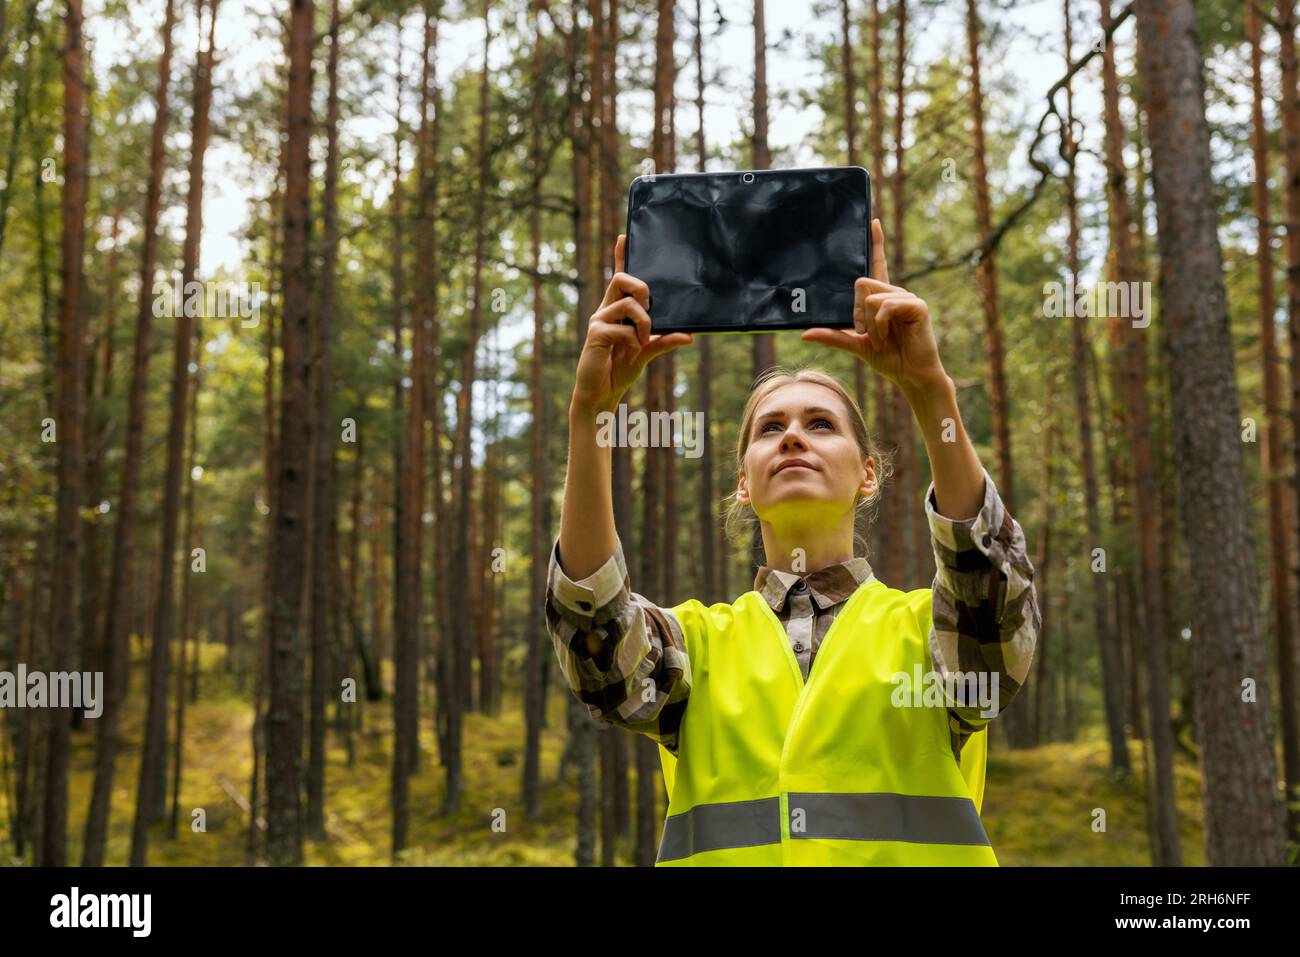 valuation and appraisal of forest. appraiser taking pictures of trees, biomass estimation Stock Photo